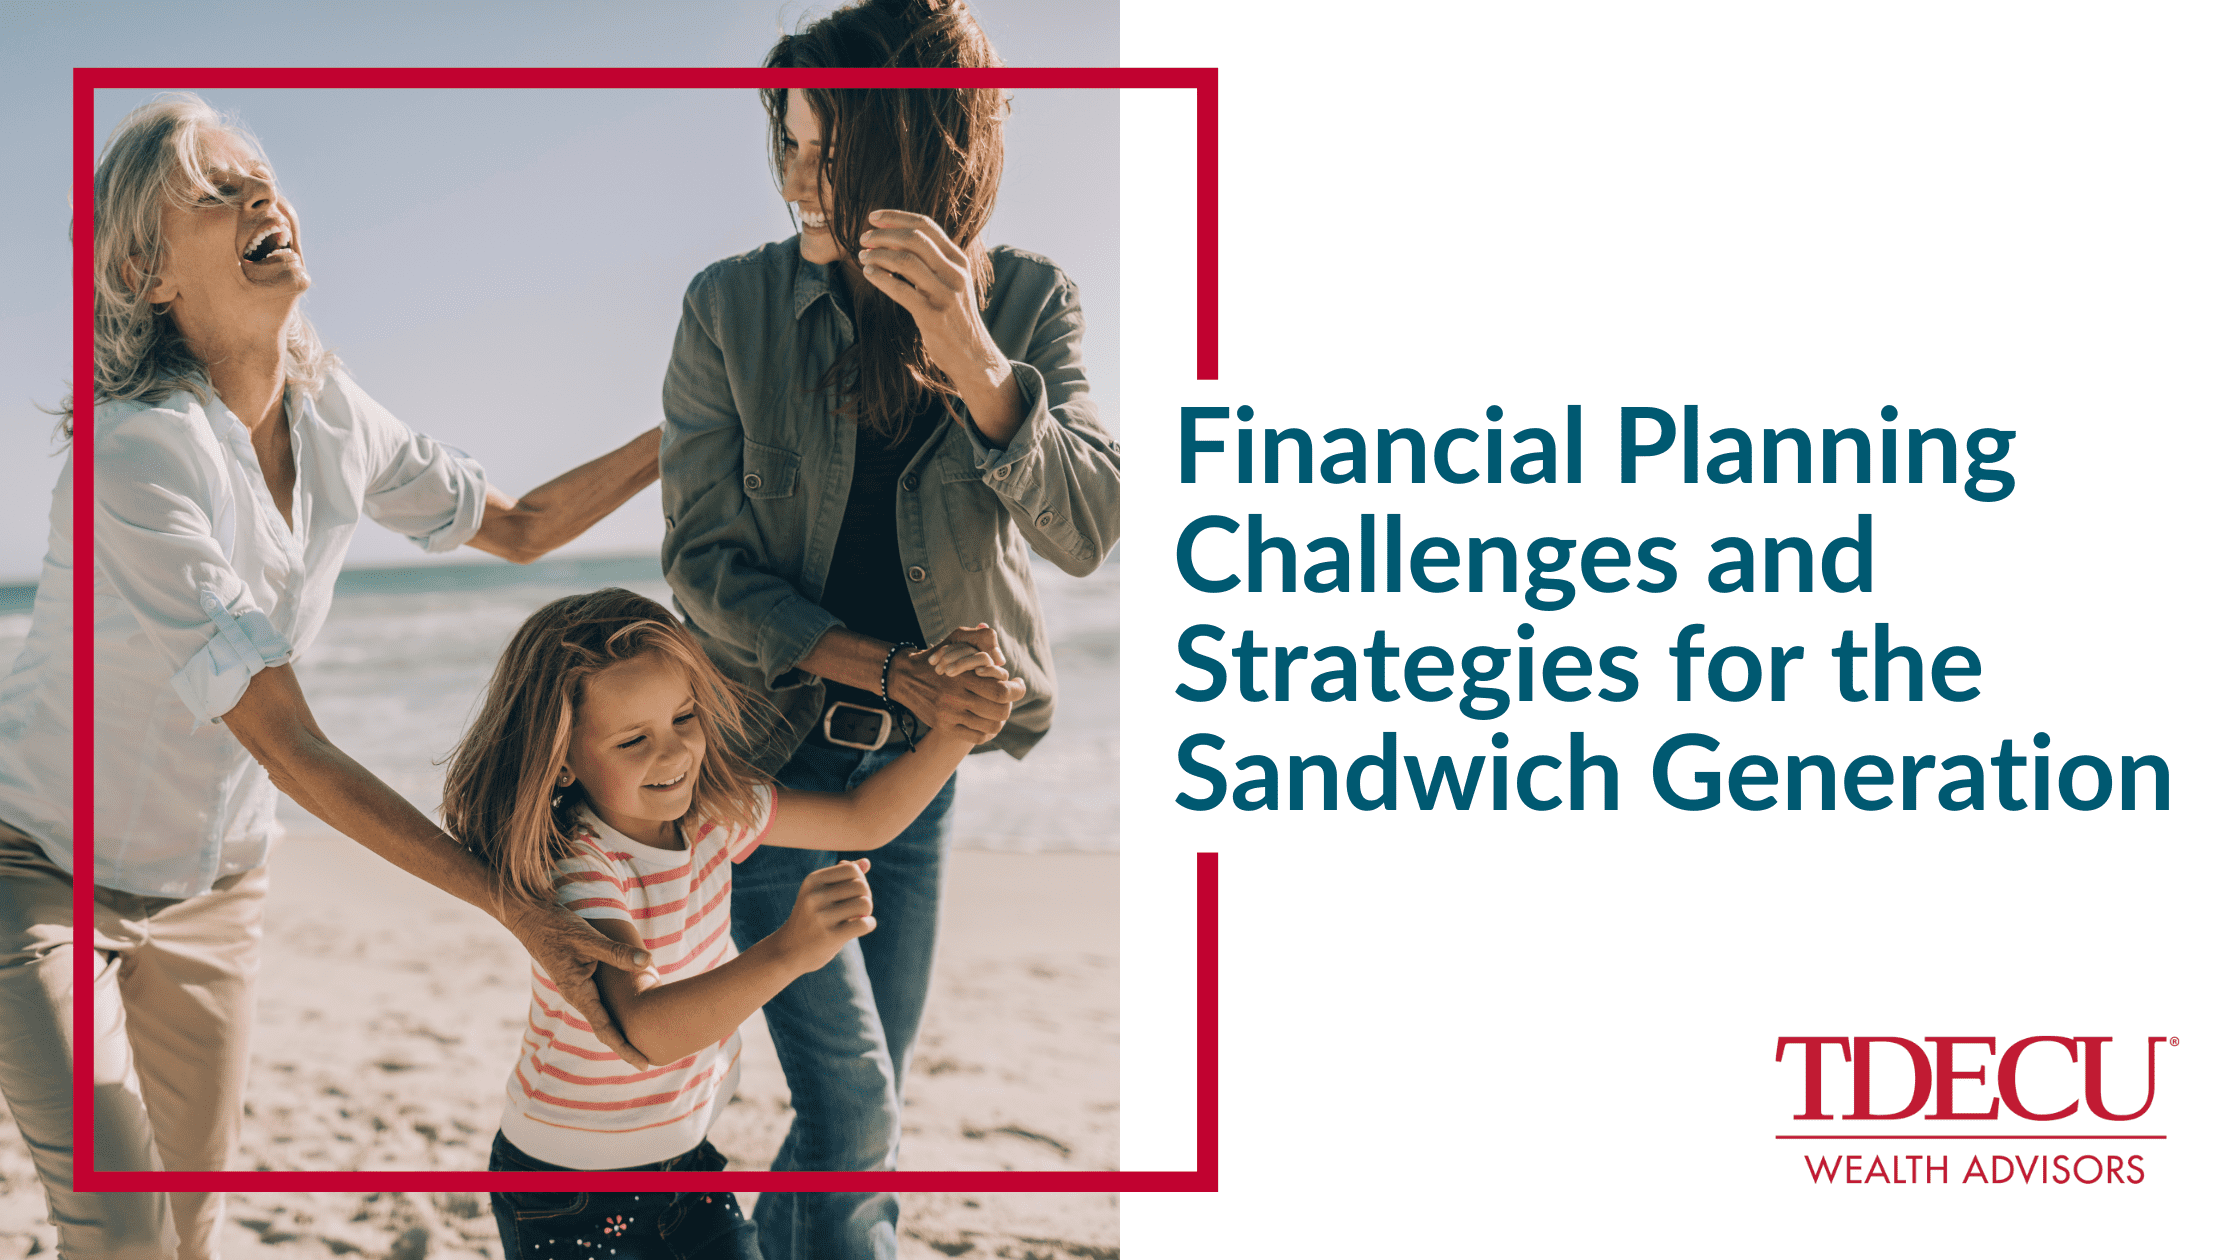 Financial Planning Challenges and Strategies for the Sandwich Generation